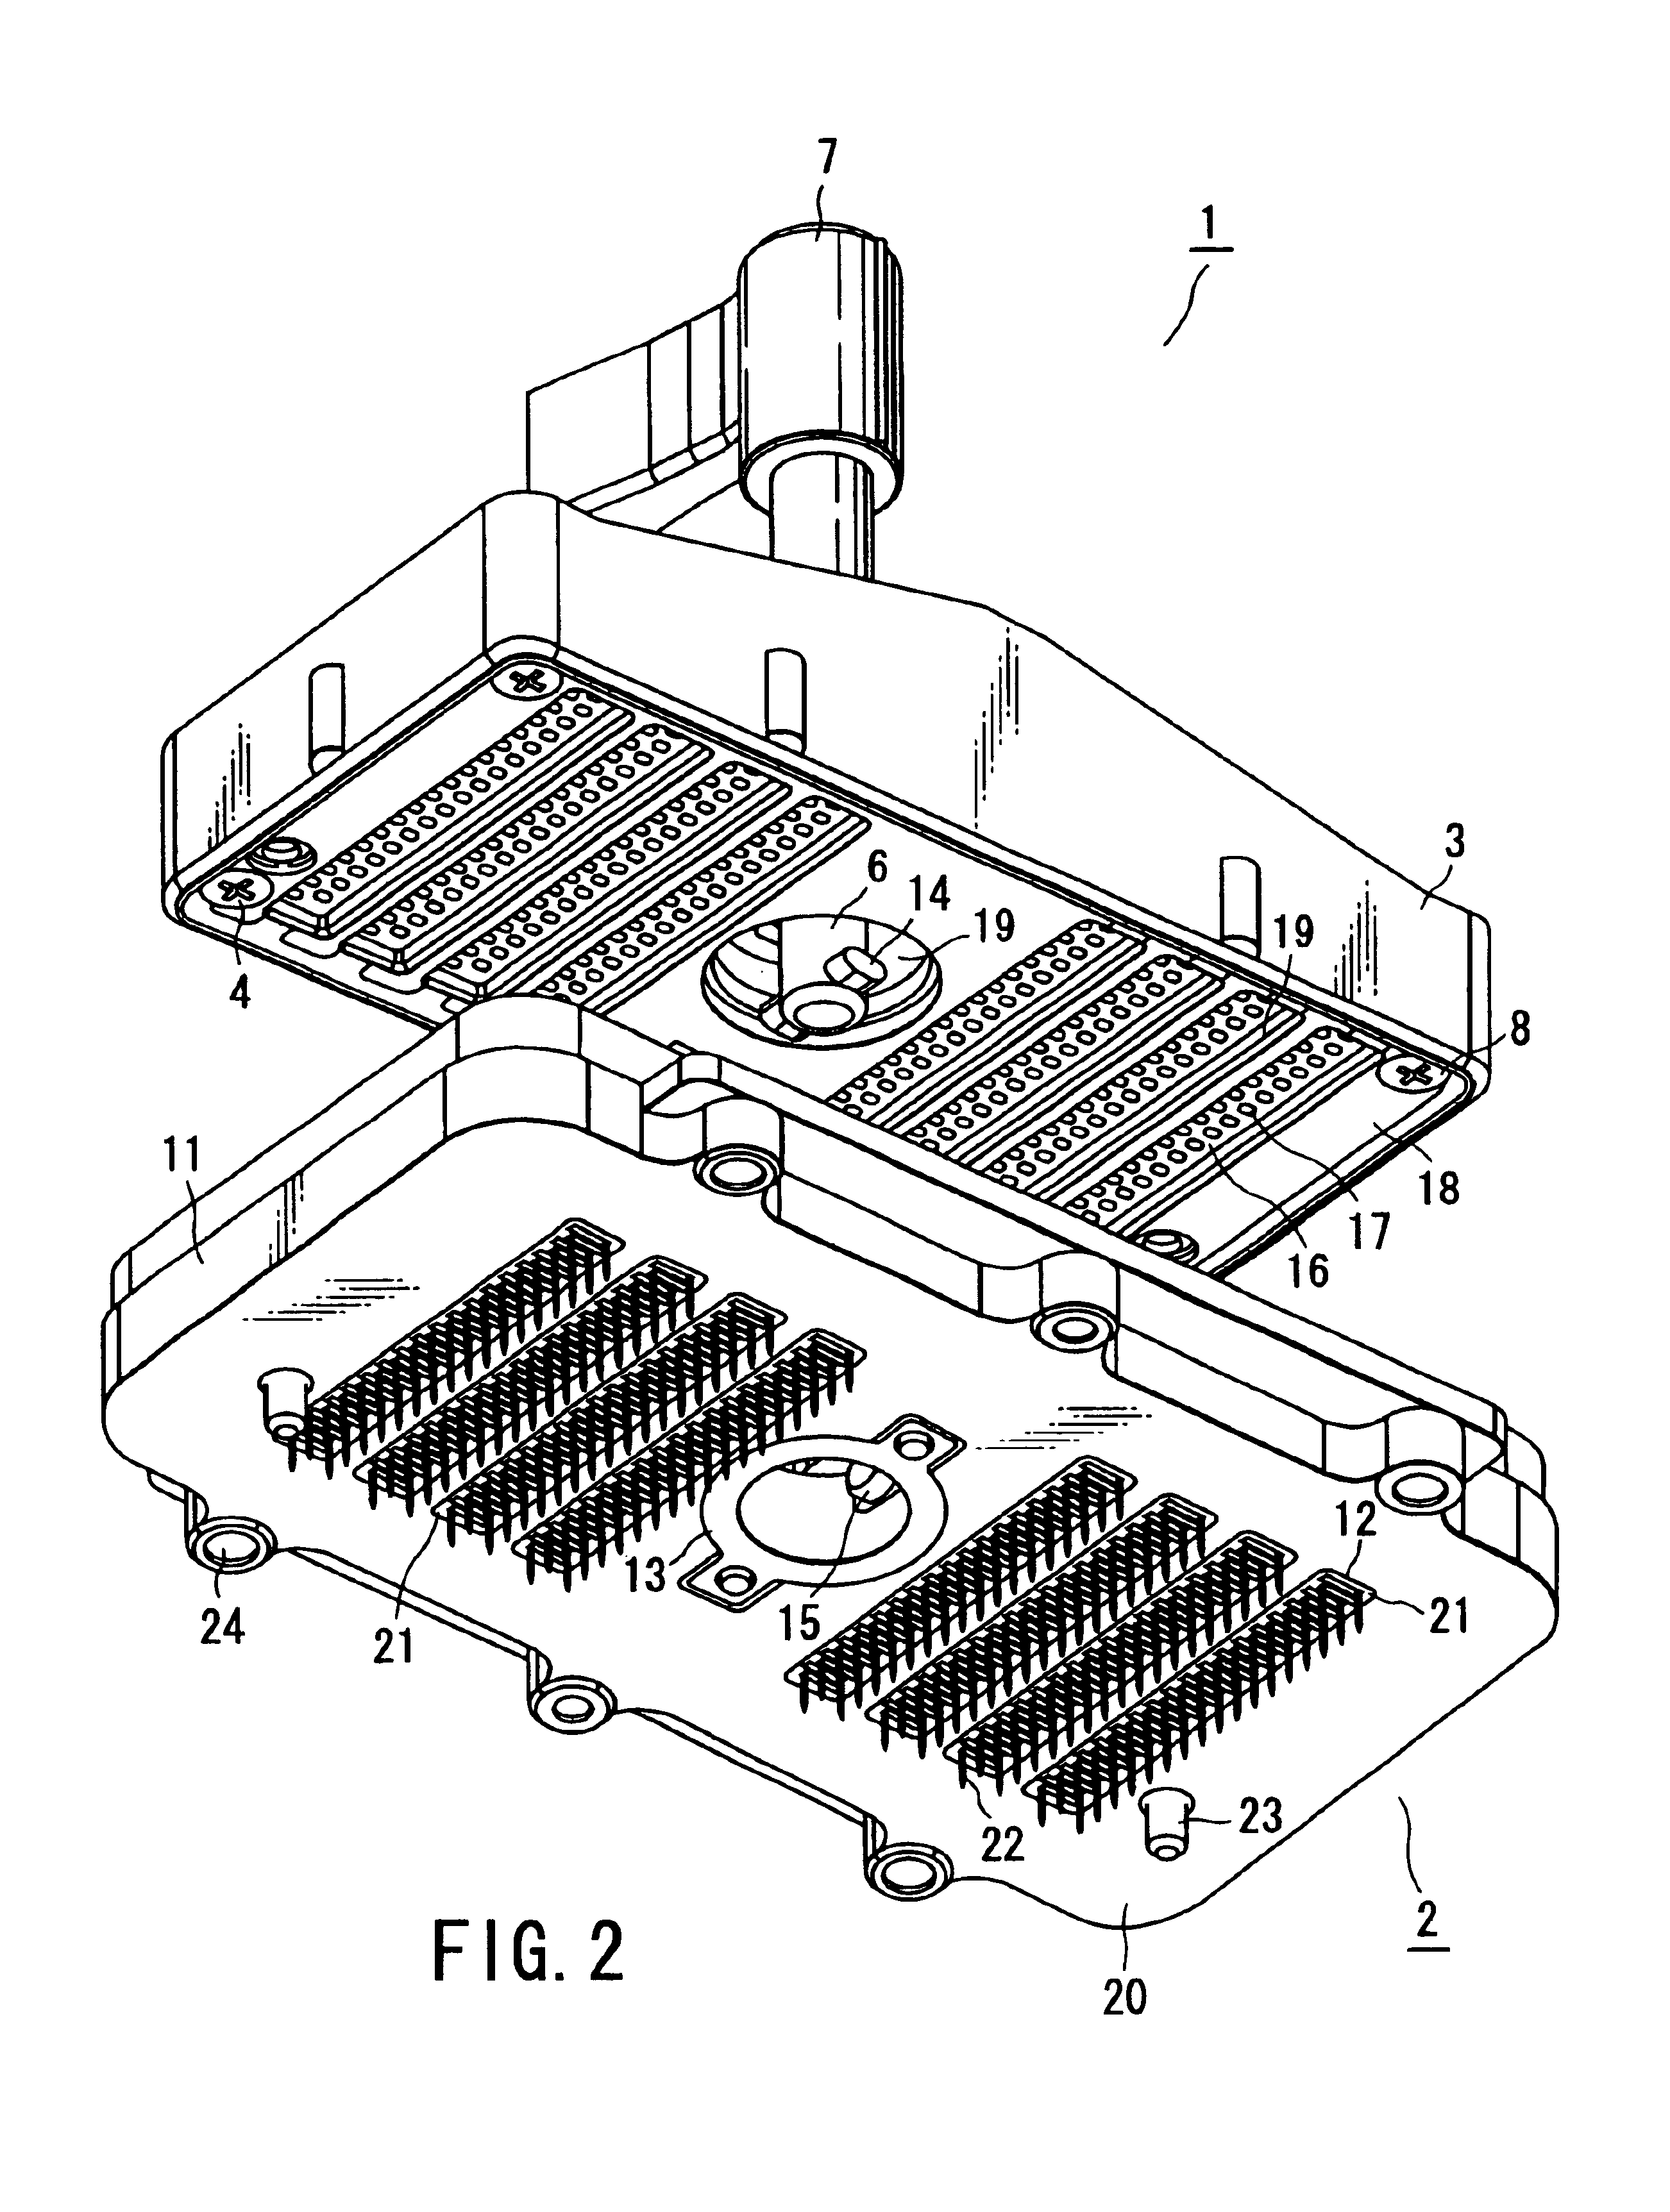 Multicore connector for connecting a plurality of contact pads of a circuit board to a plurality of contacts in a one-to-one correspondence